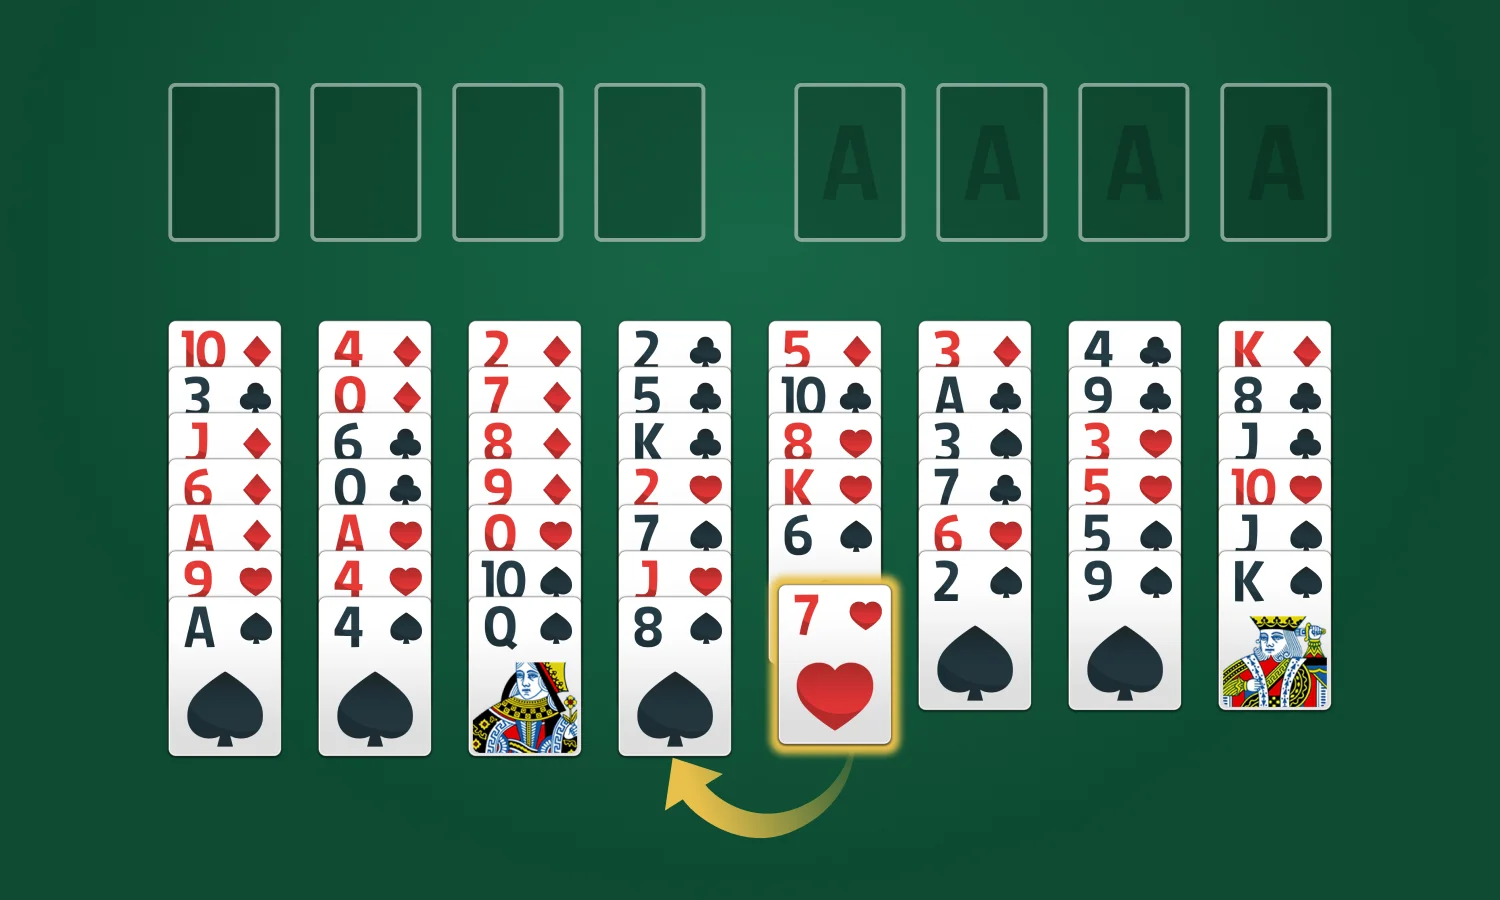 FreeCell Solitaire Rules: Step 1